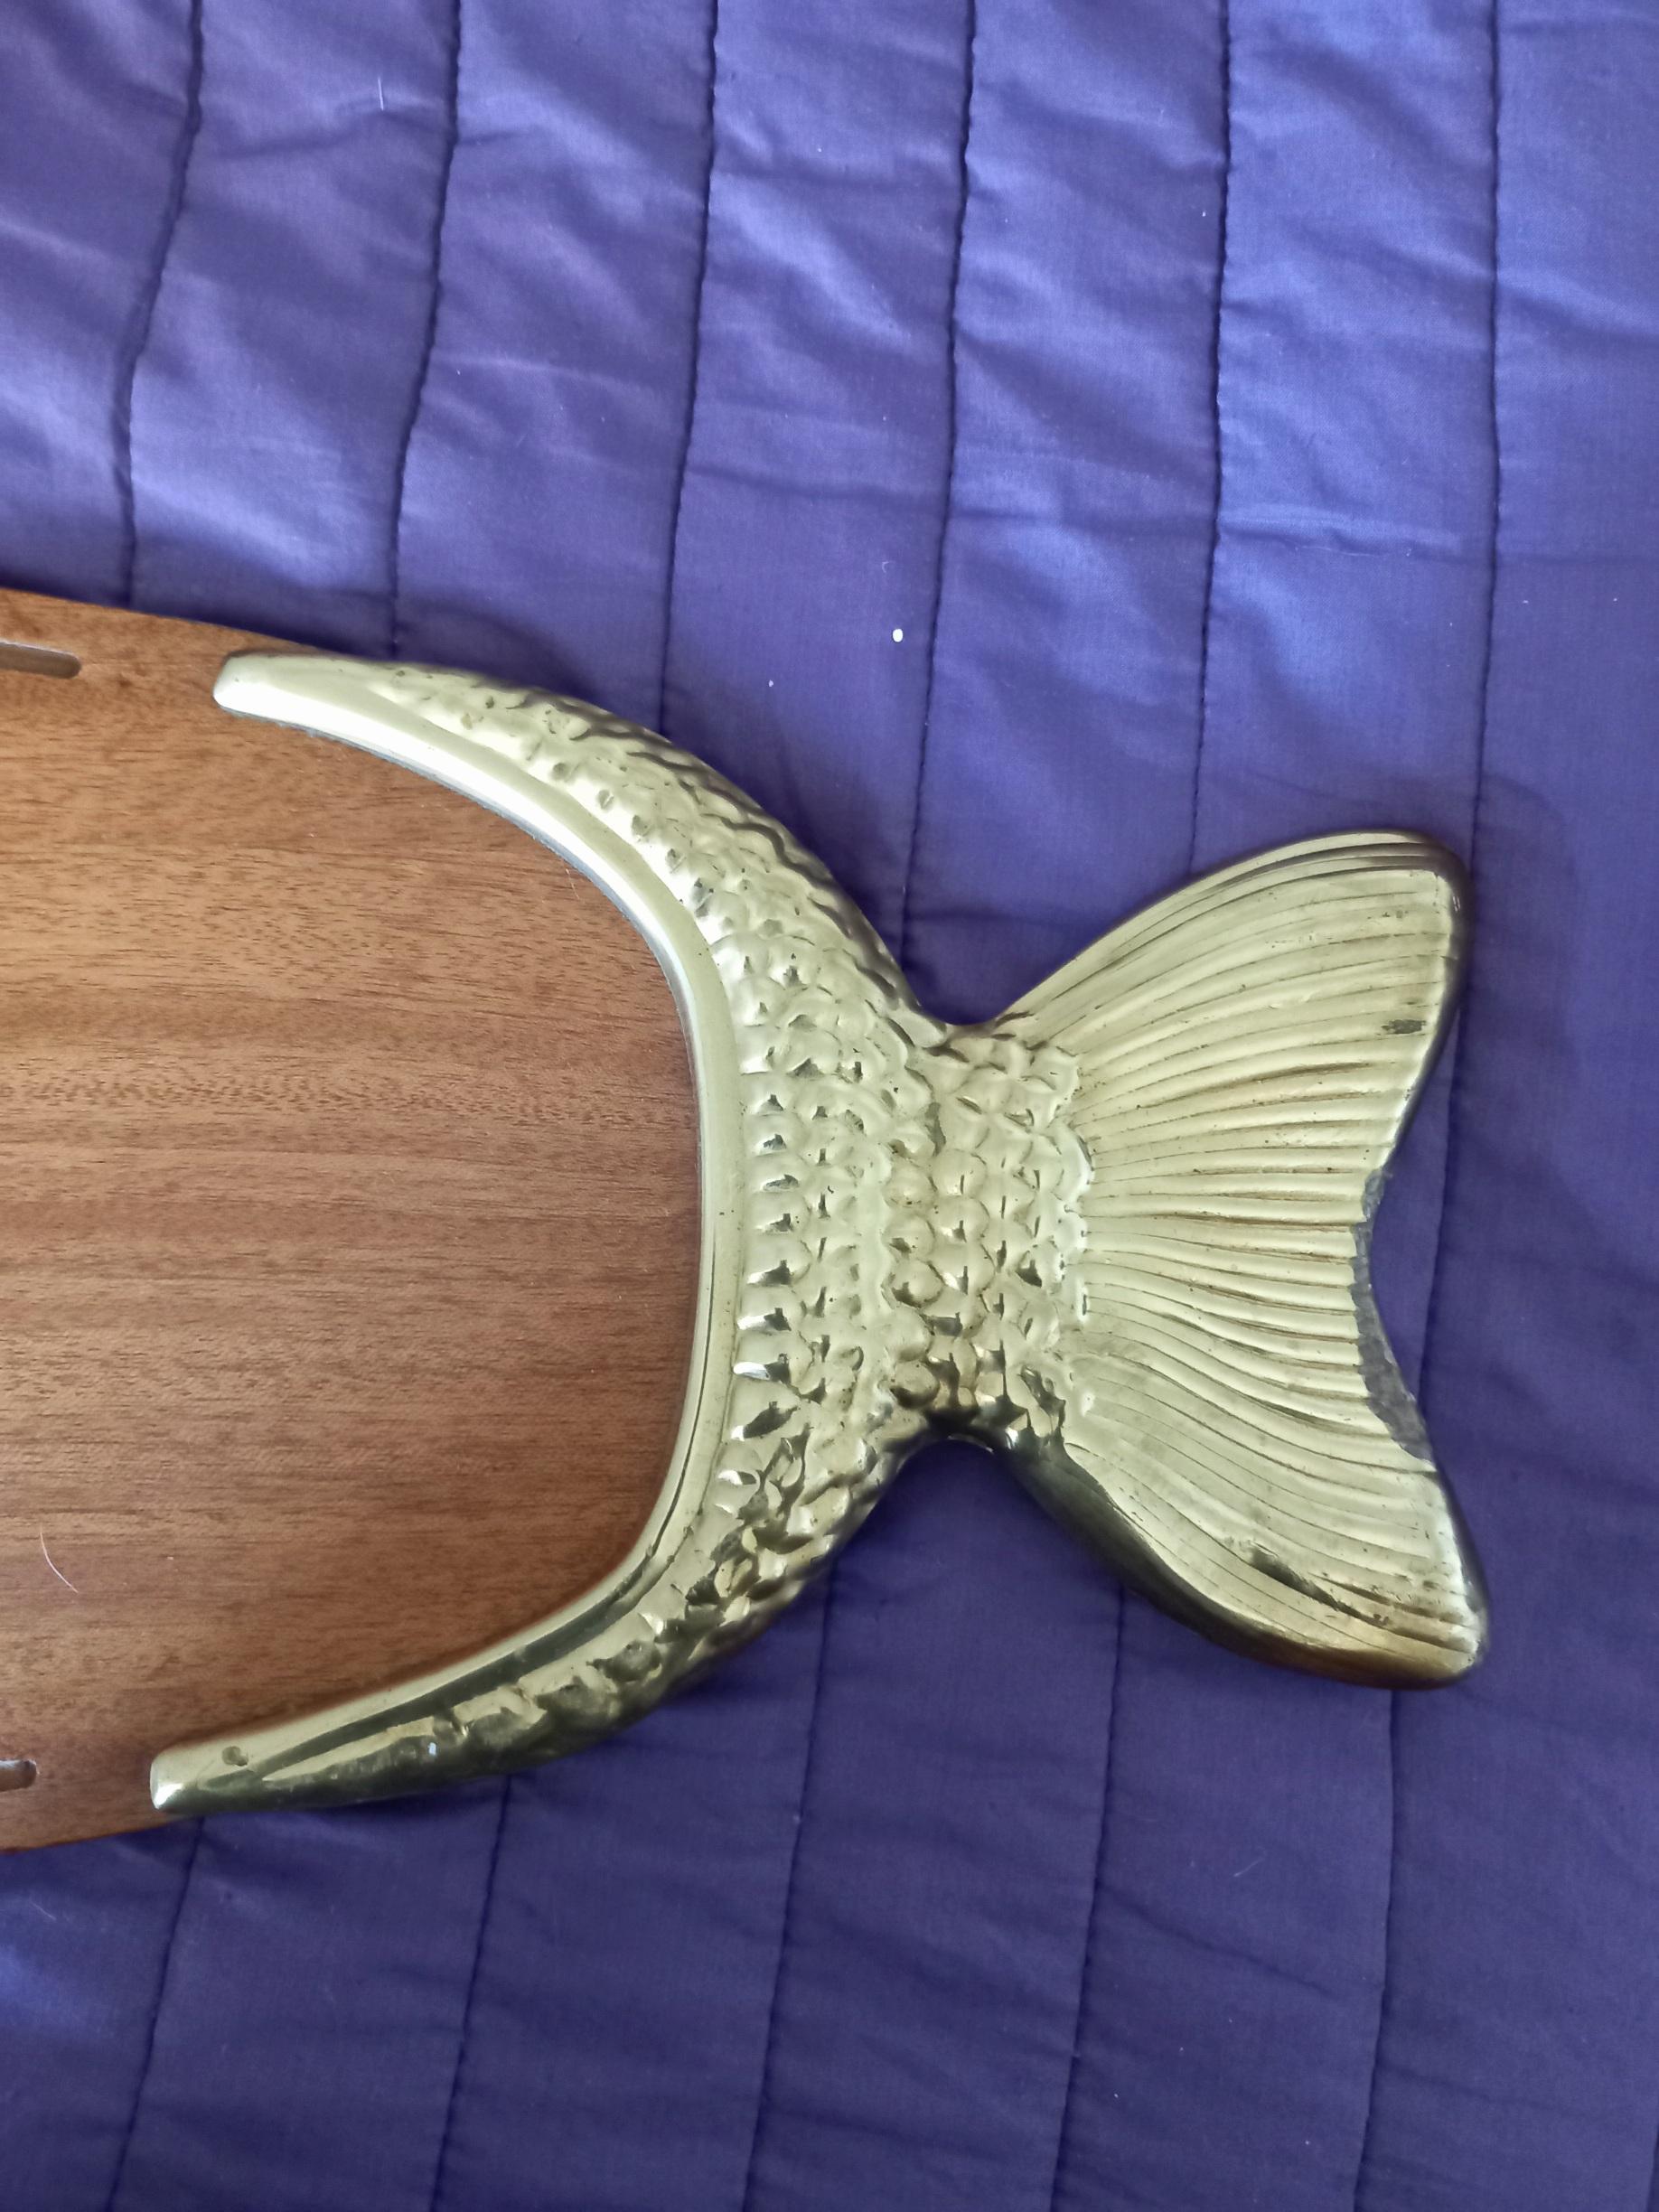 Wood and brass serving board
Beautiful piece to serve your salmon or fish.
The wood is in perfect condition. The metal begins to have normal signs, not wear, signs of the passage of time. The person who buys it can polish it or clean it with a metal